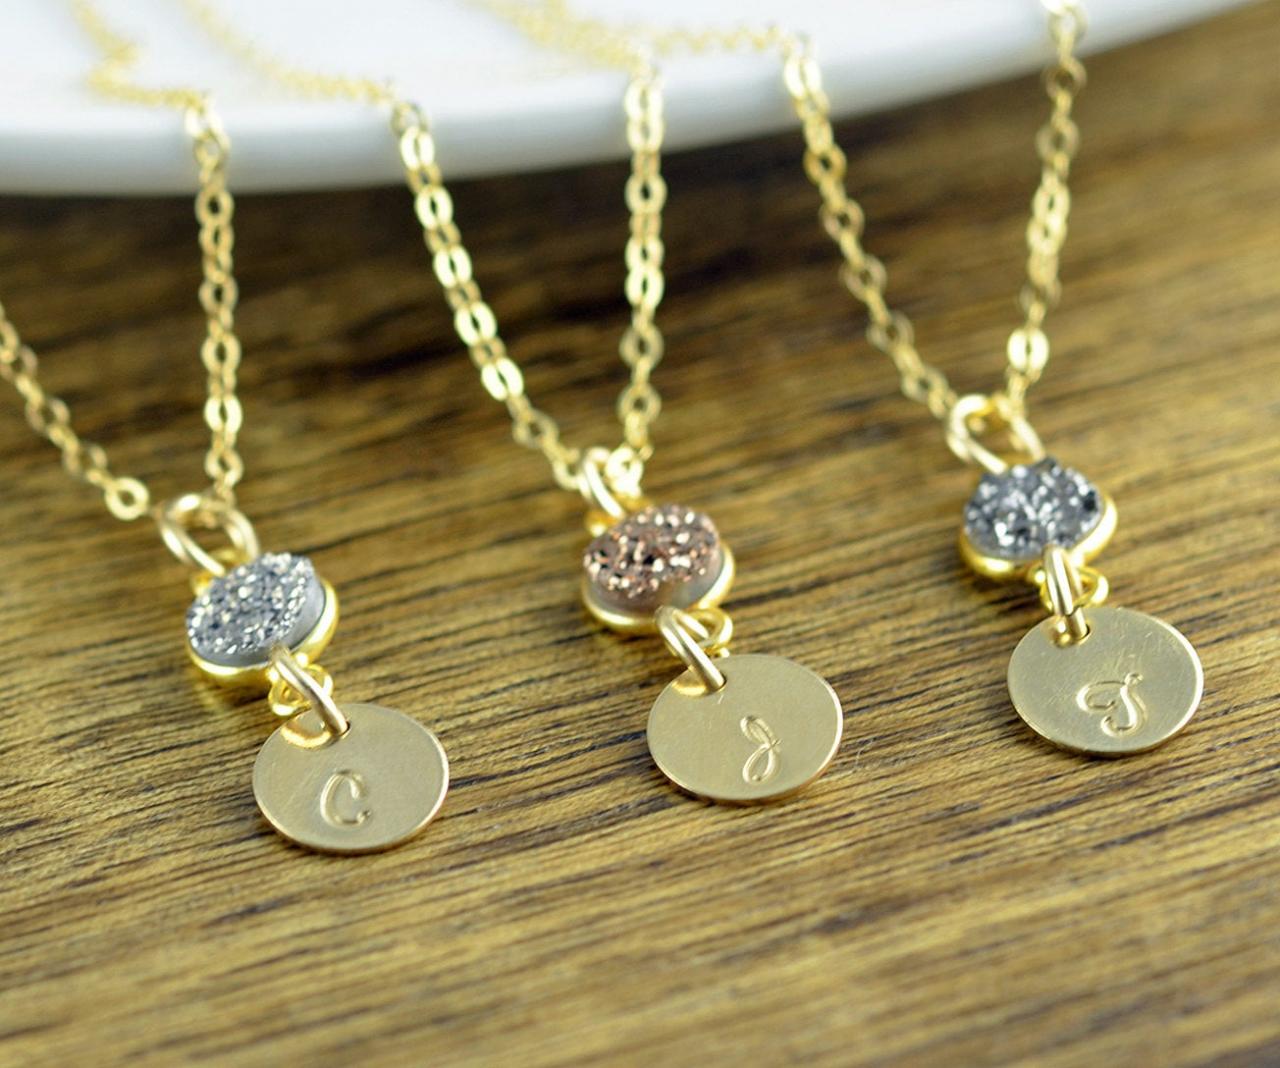 Gold Initial Necklace - Personalized Hand Stamped Initial Necklace - Druzy Jewelry - Druzy Necklace - Bridesmaid Gift - Bridesmaid Jewelry